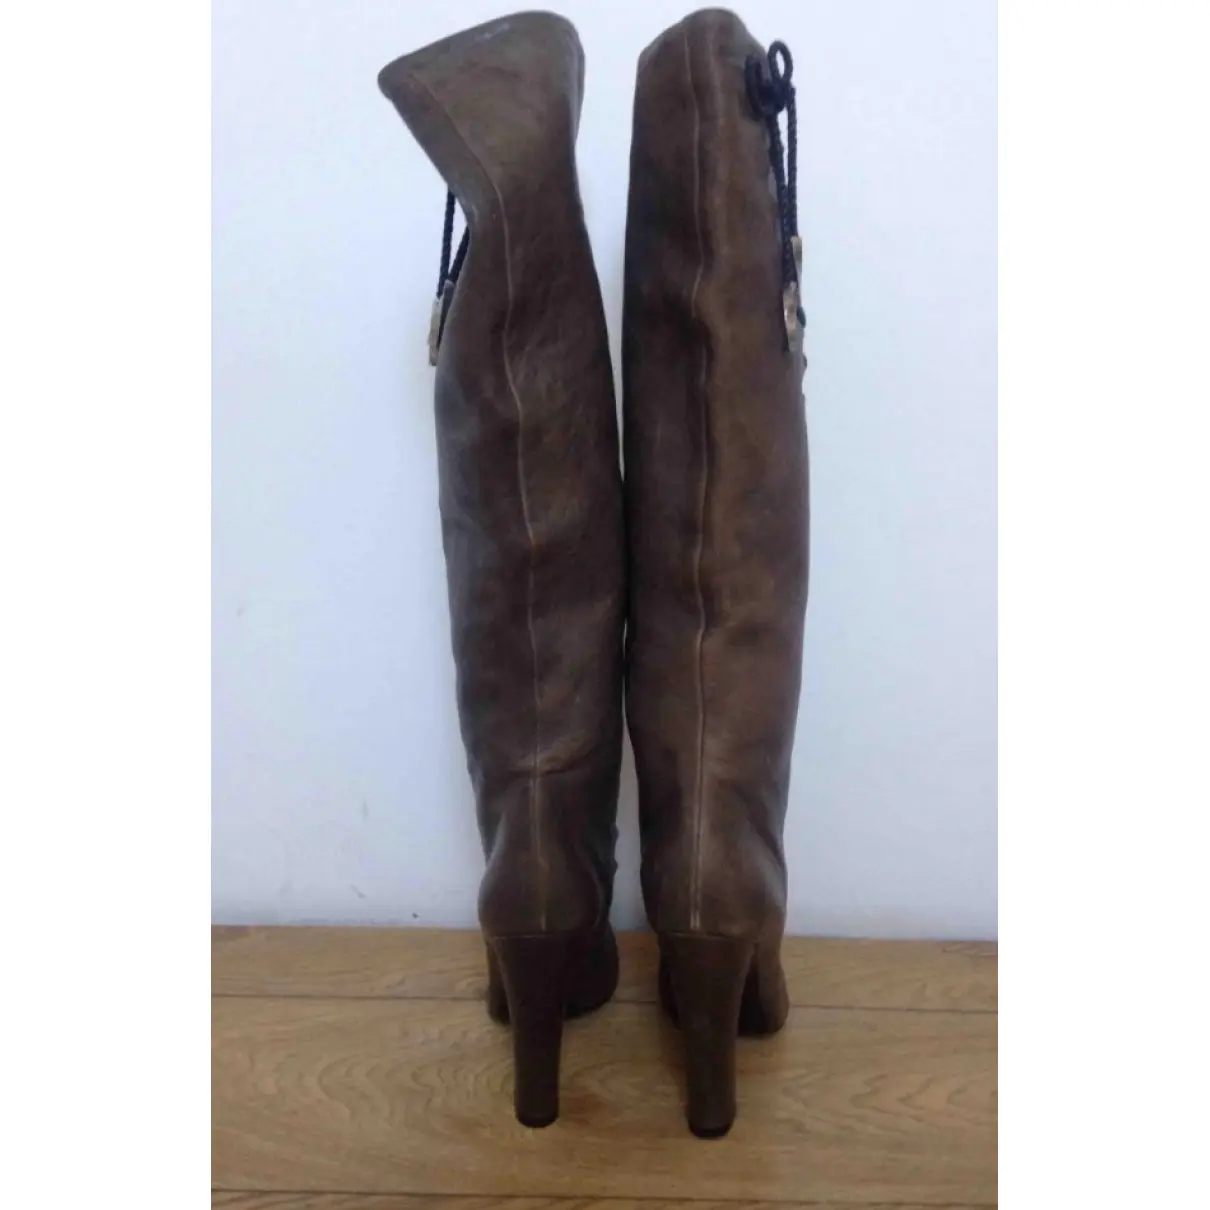 Buy Nina Ricci Leather boots online